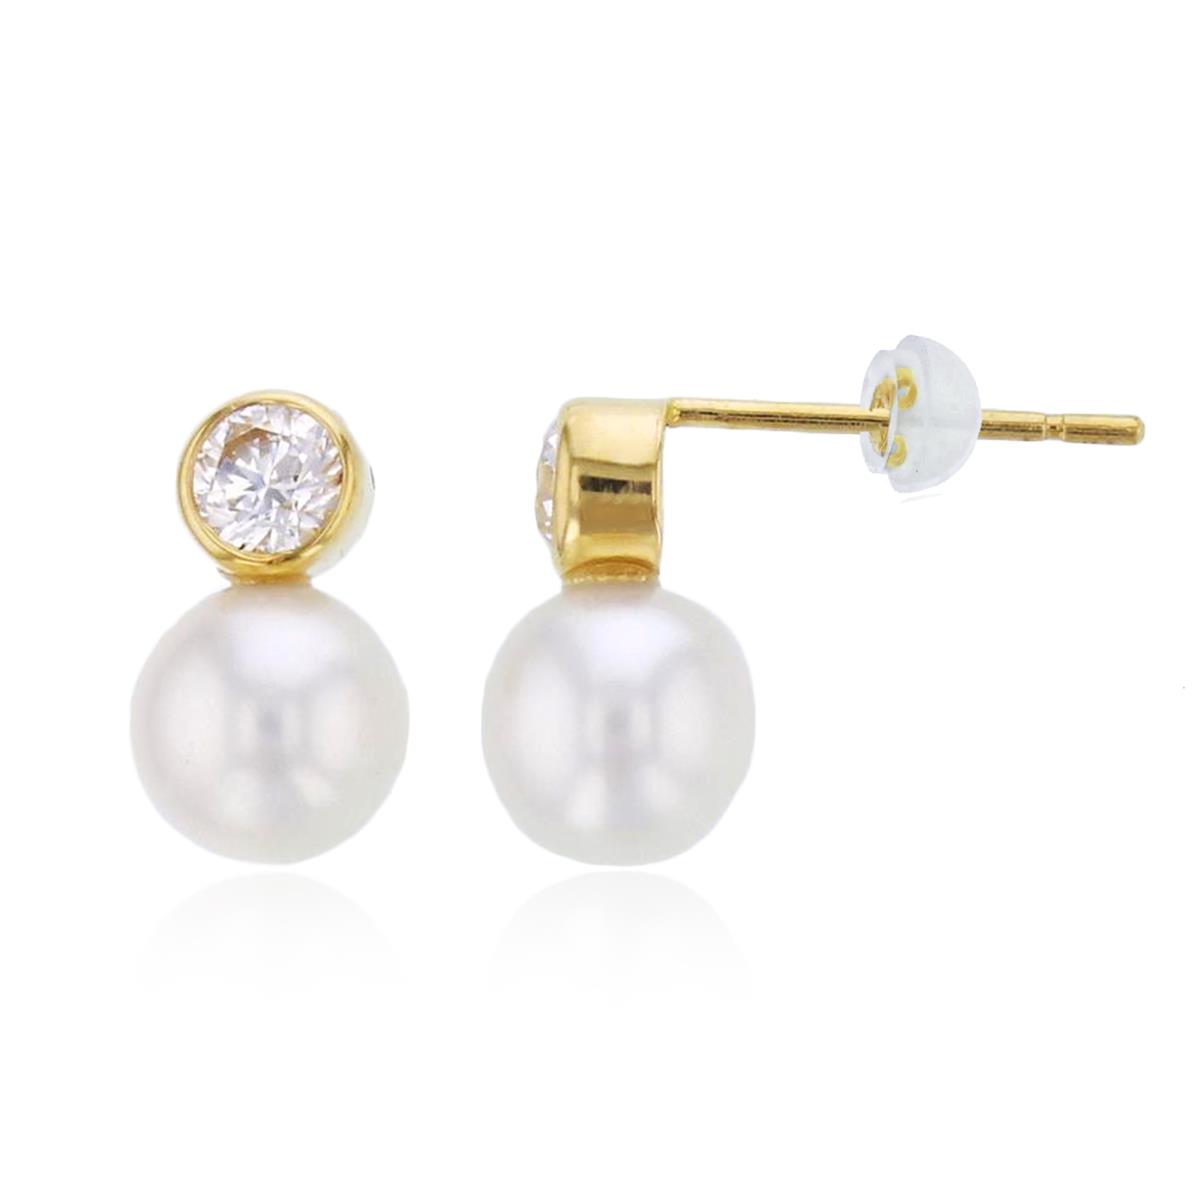 14K Yellow Gold Rnd Bezel CZ & 5mm Fresh Water Pearl Studs with Silicon Backs